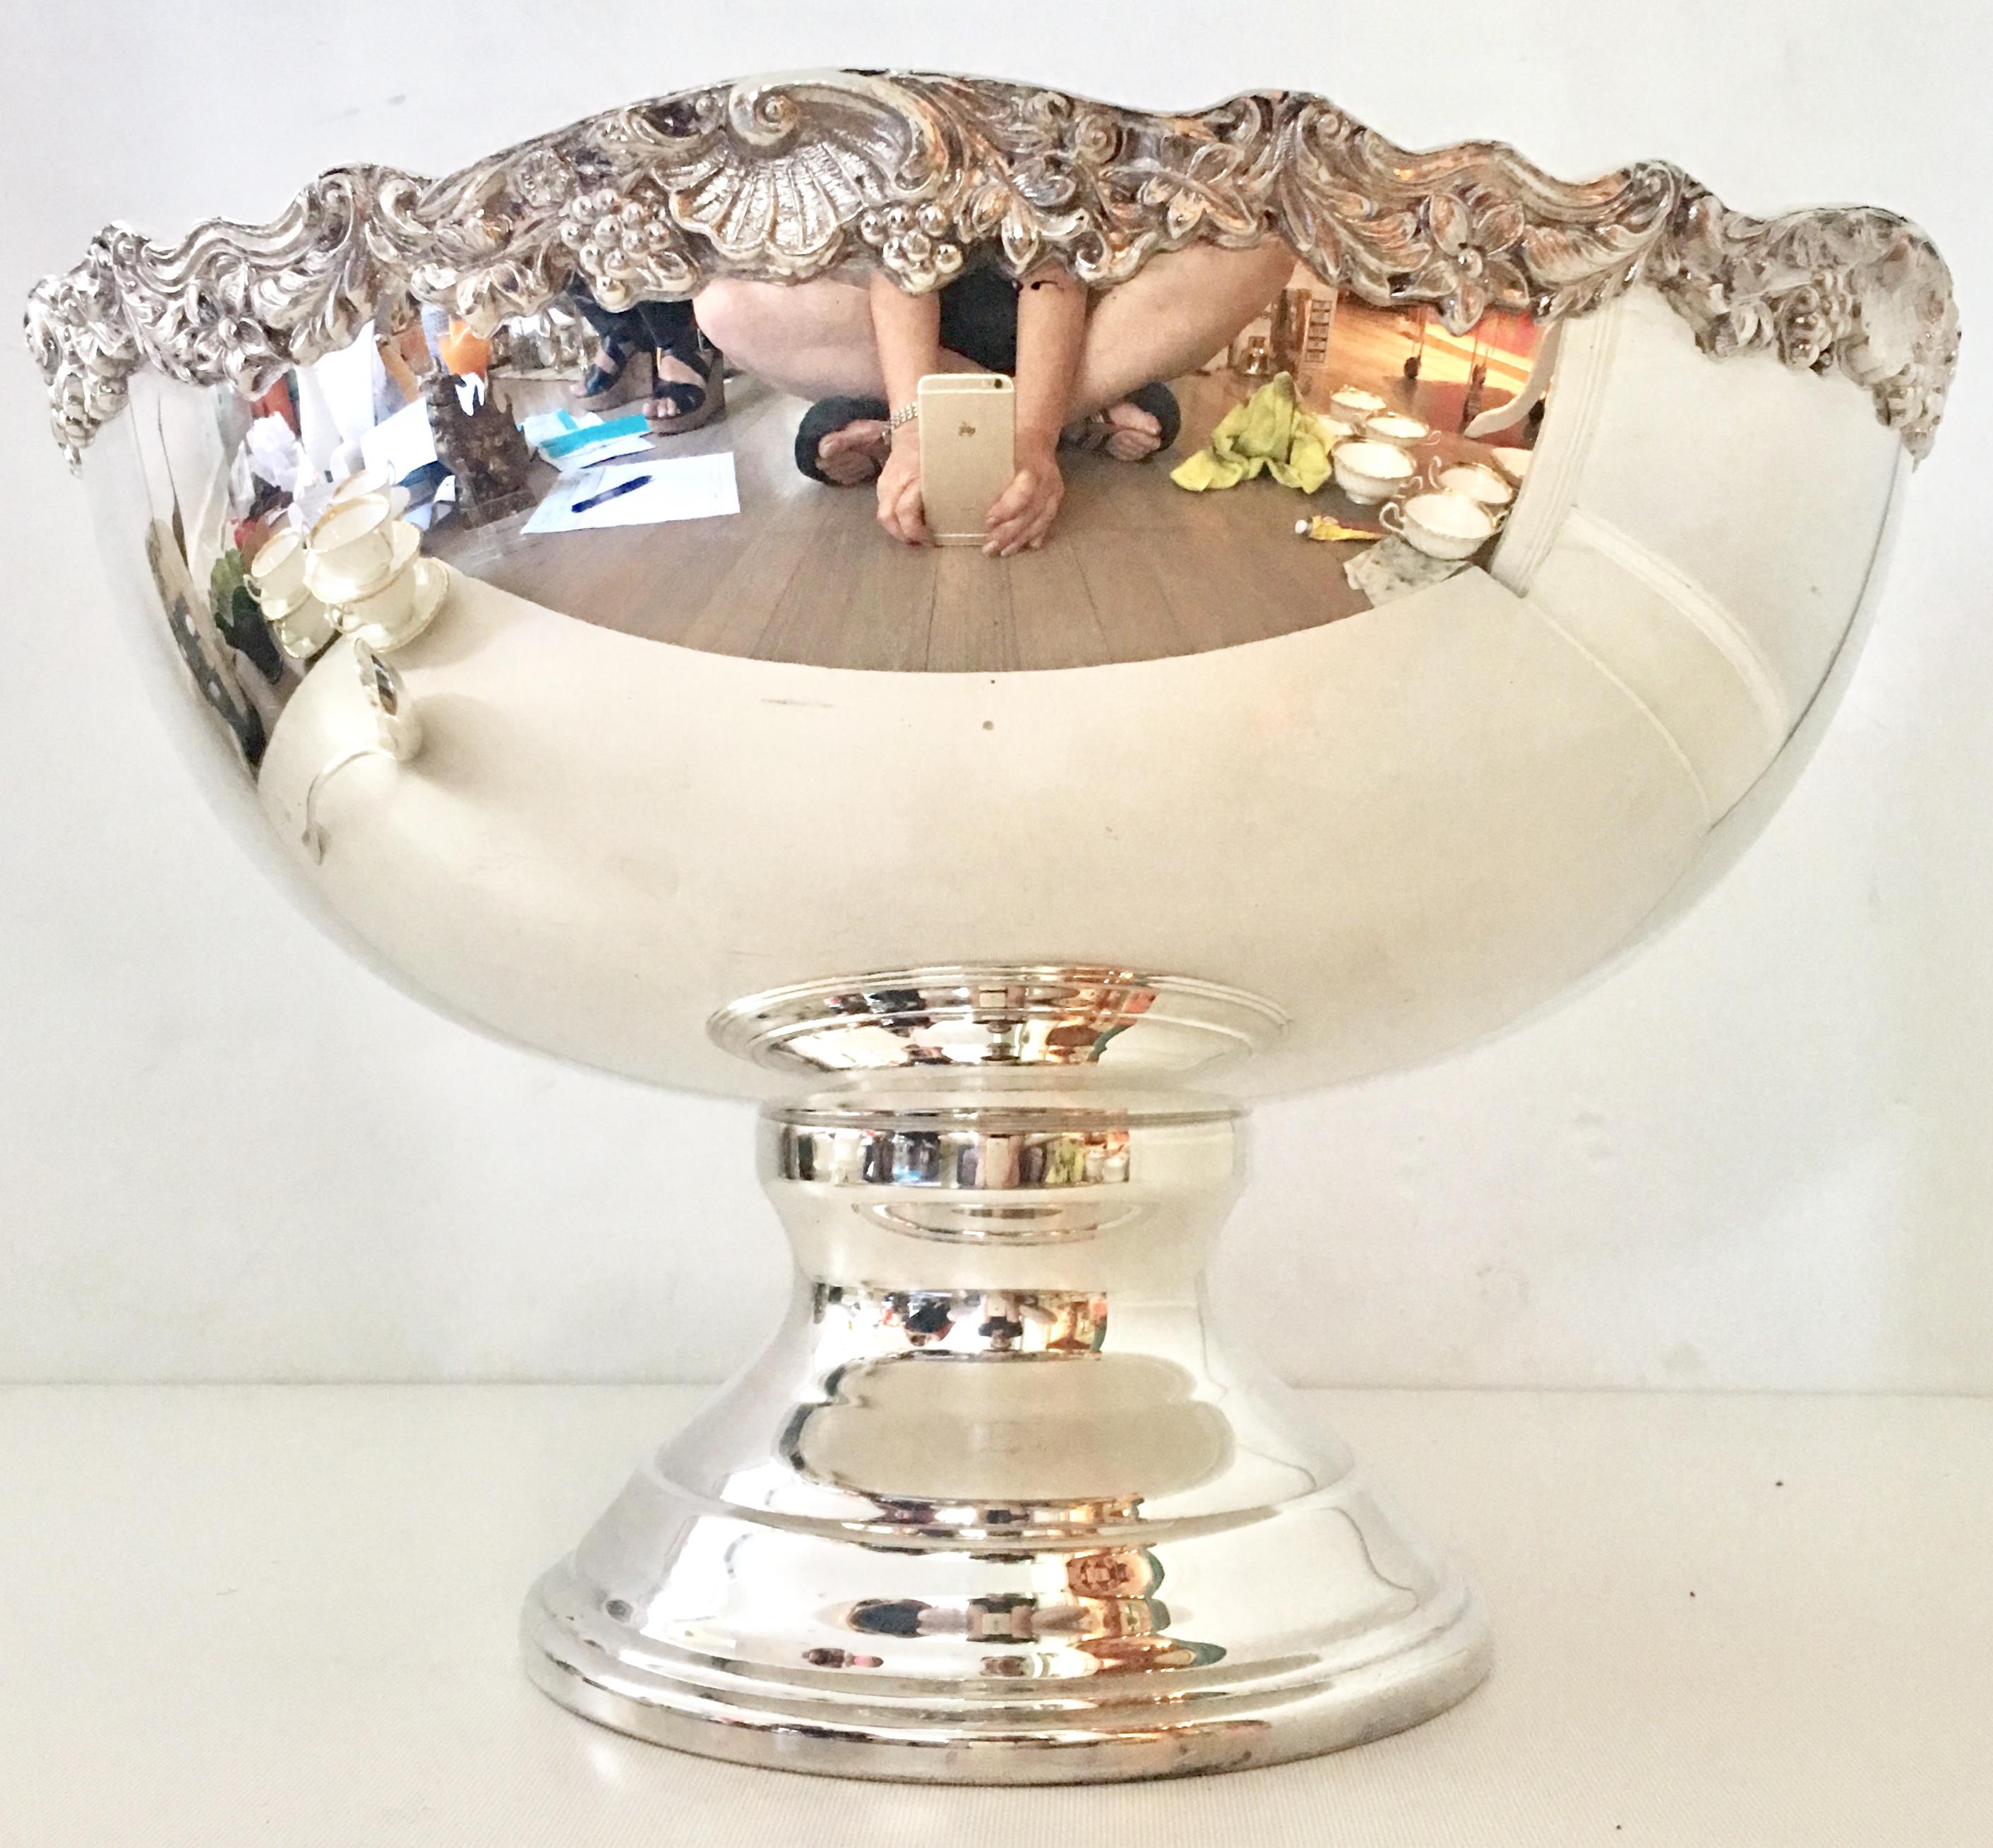 20th century silver plate footed punch bowl by, Towle Silversmiths. Features a shell, floral berry vine motif at the top rim. Signed on the underside, Towle silver plated.